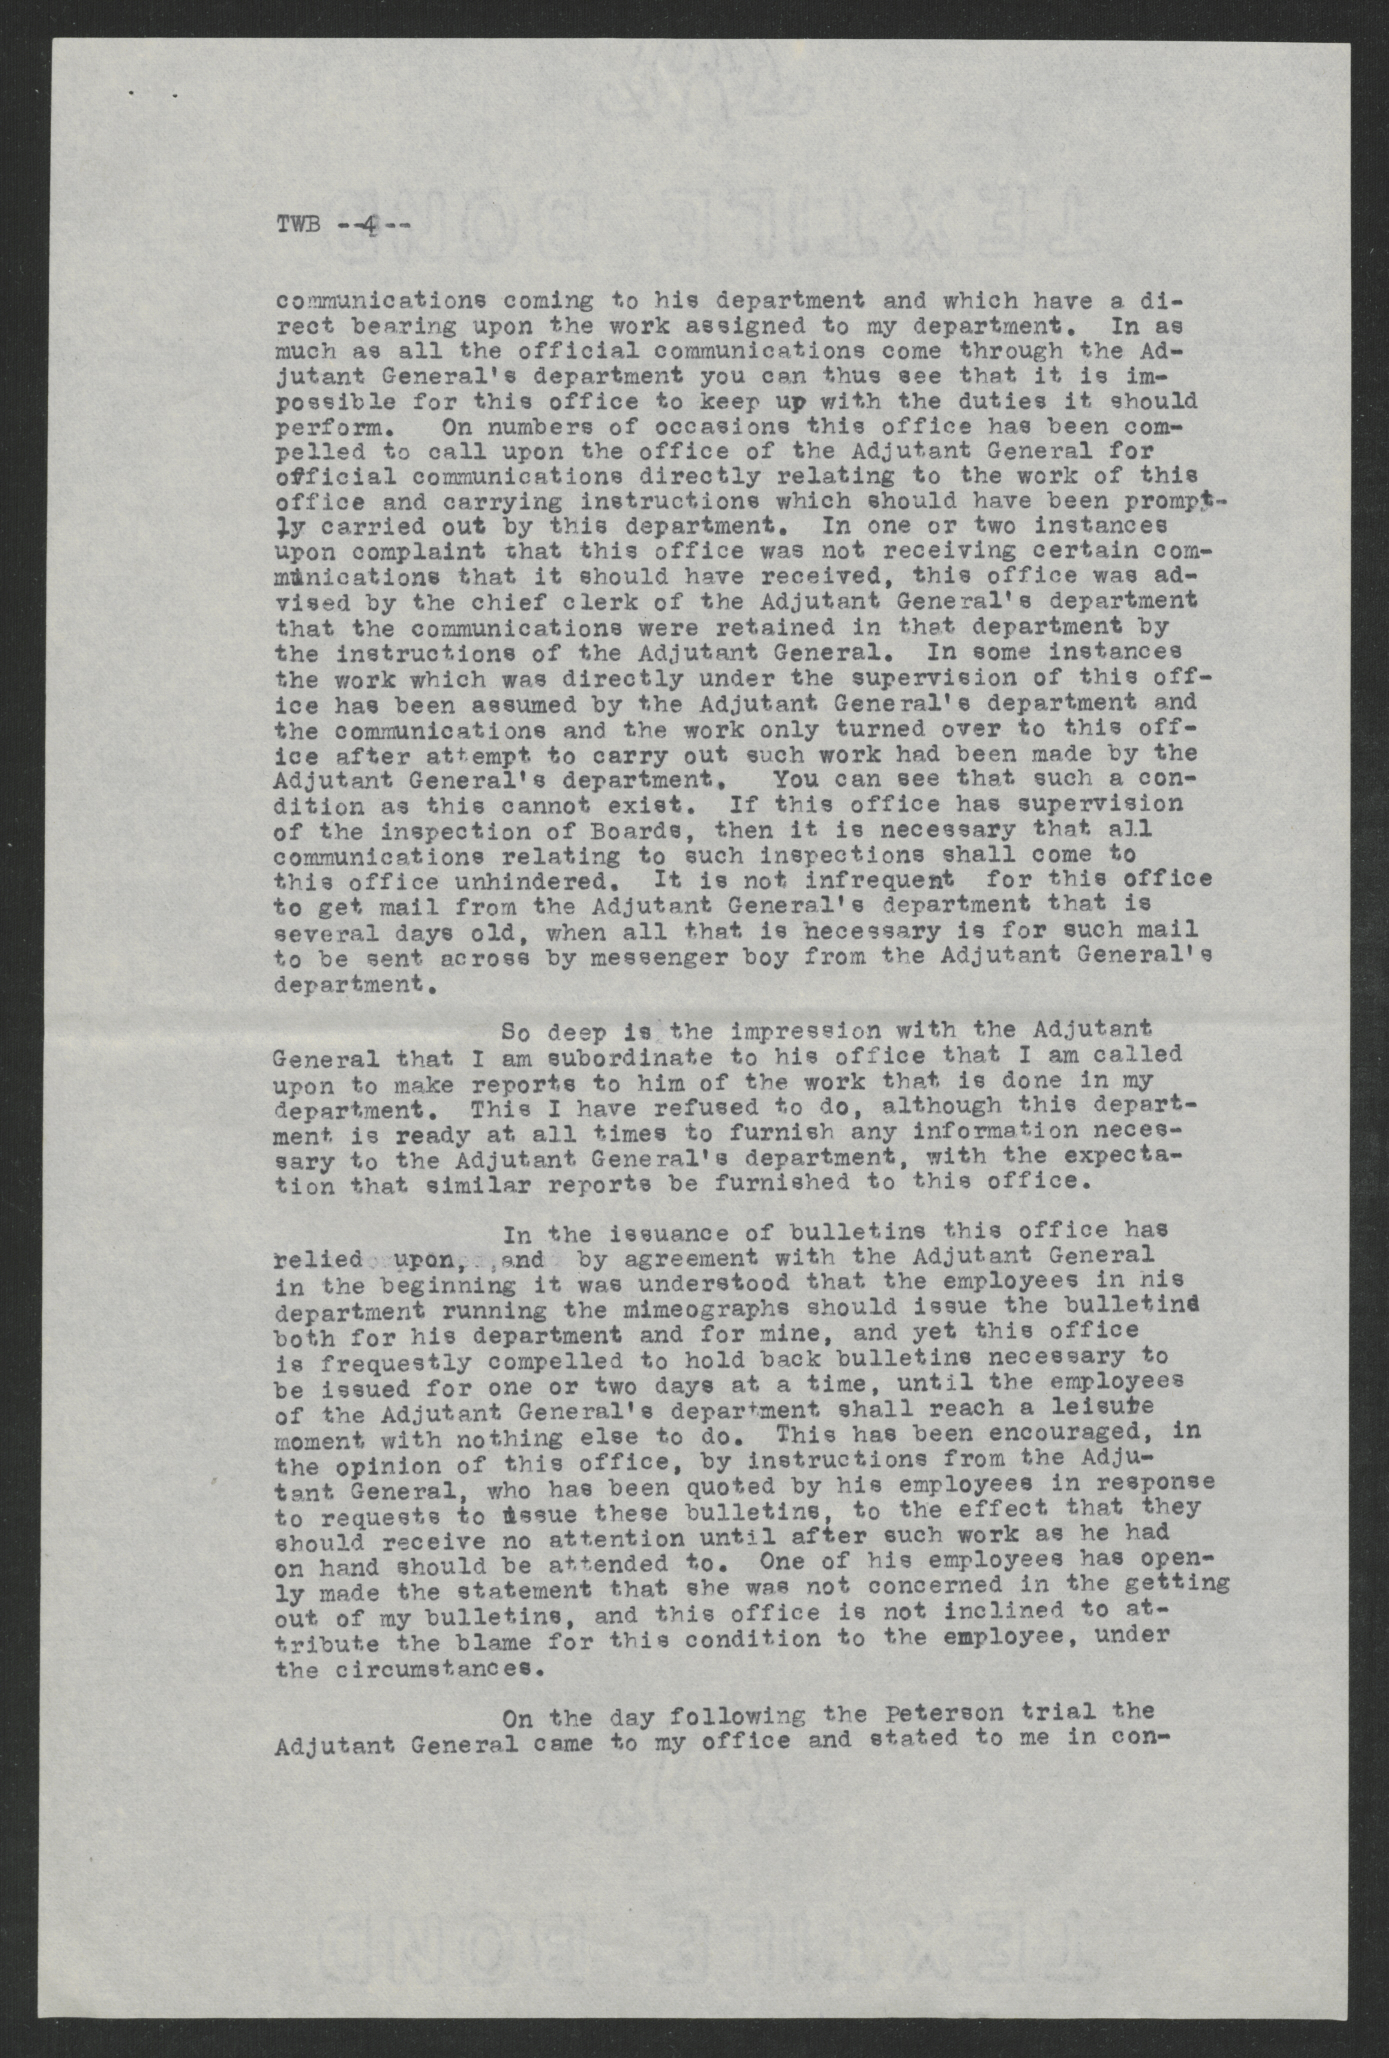 Langston to Bickett, May 17, 1918, page 4